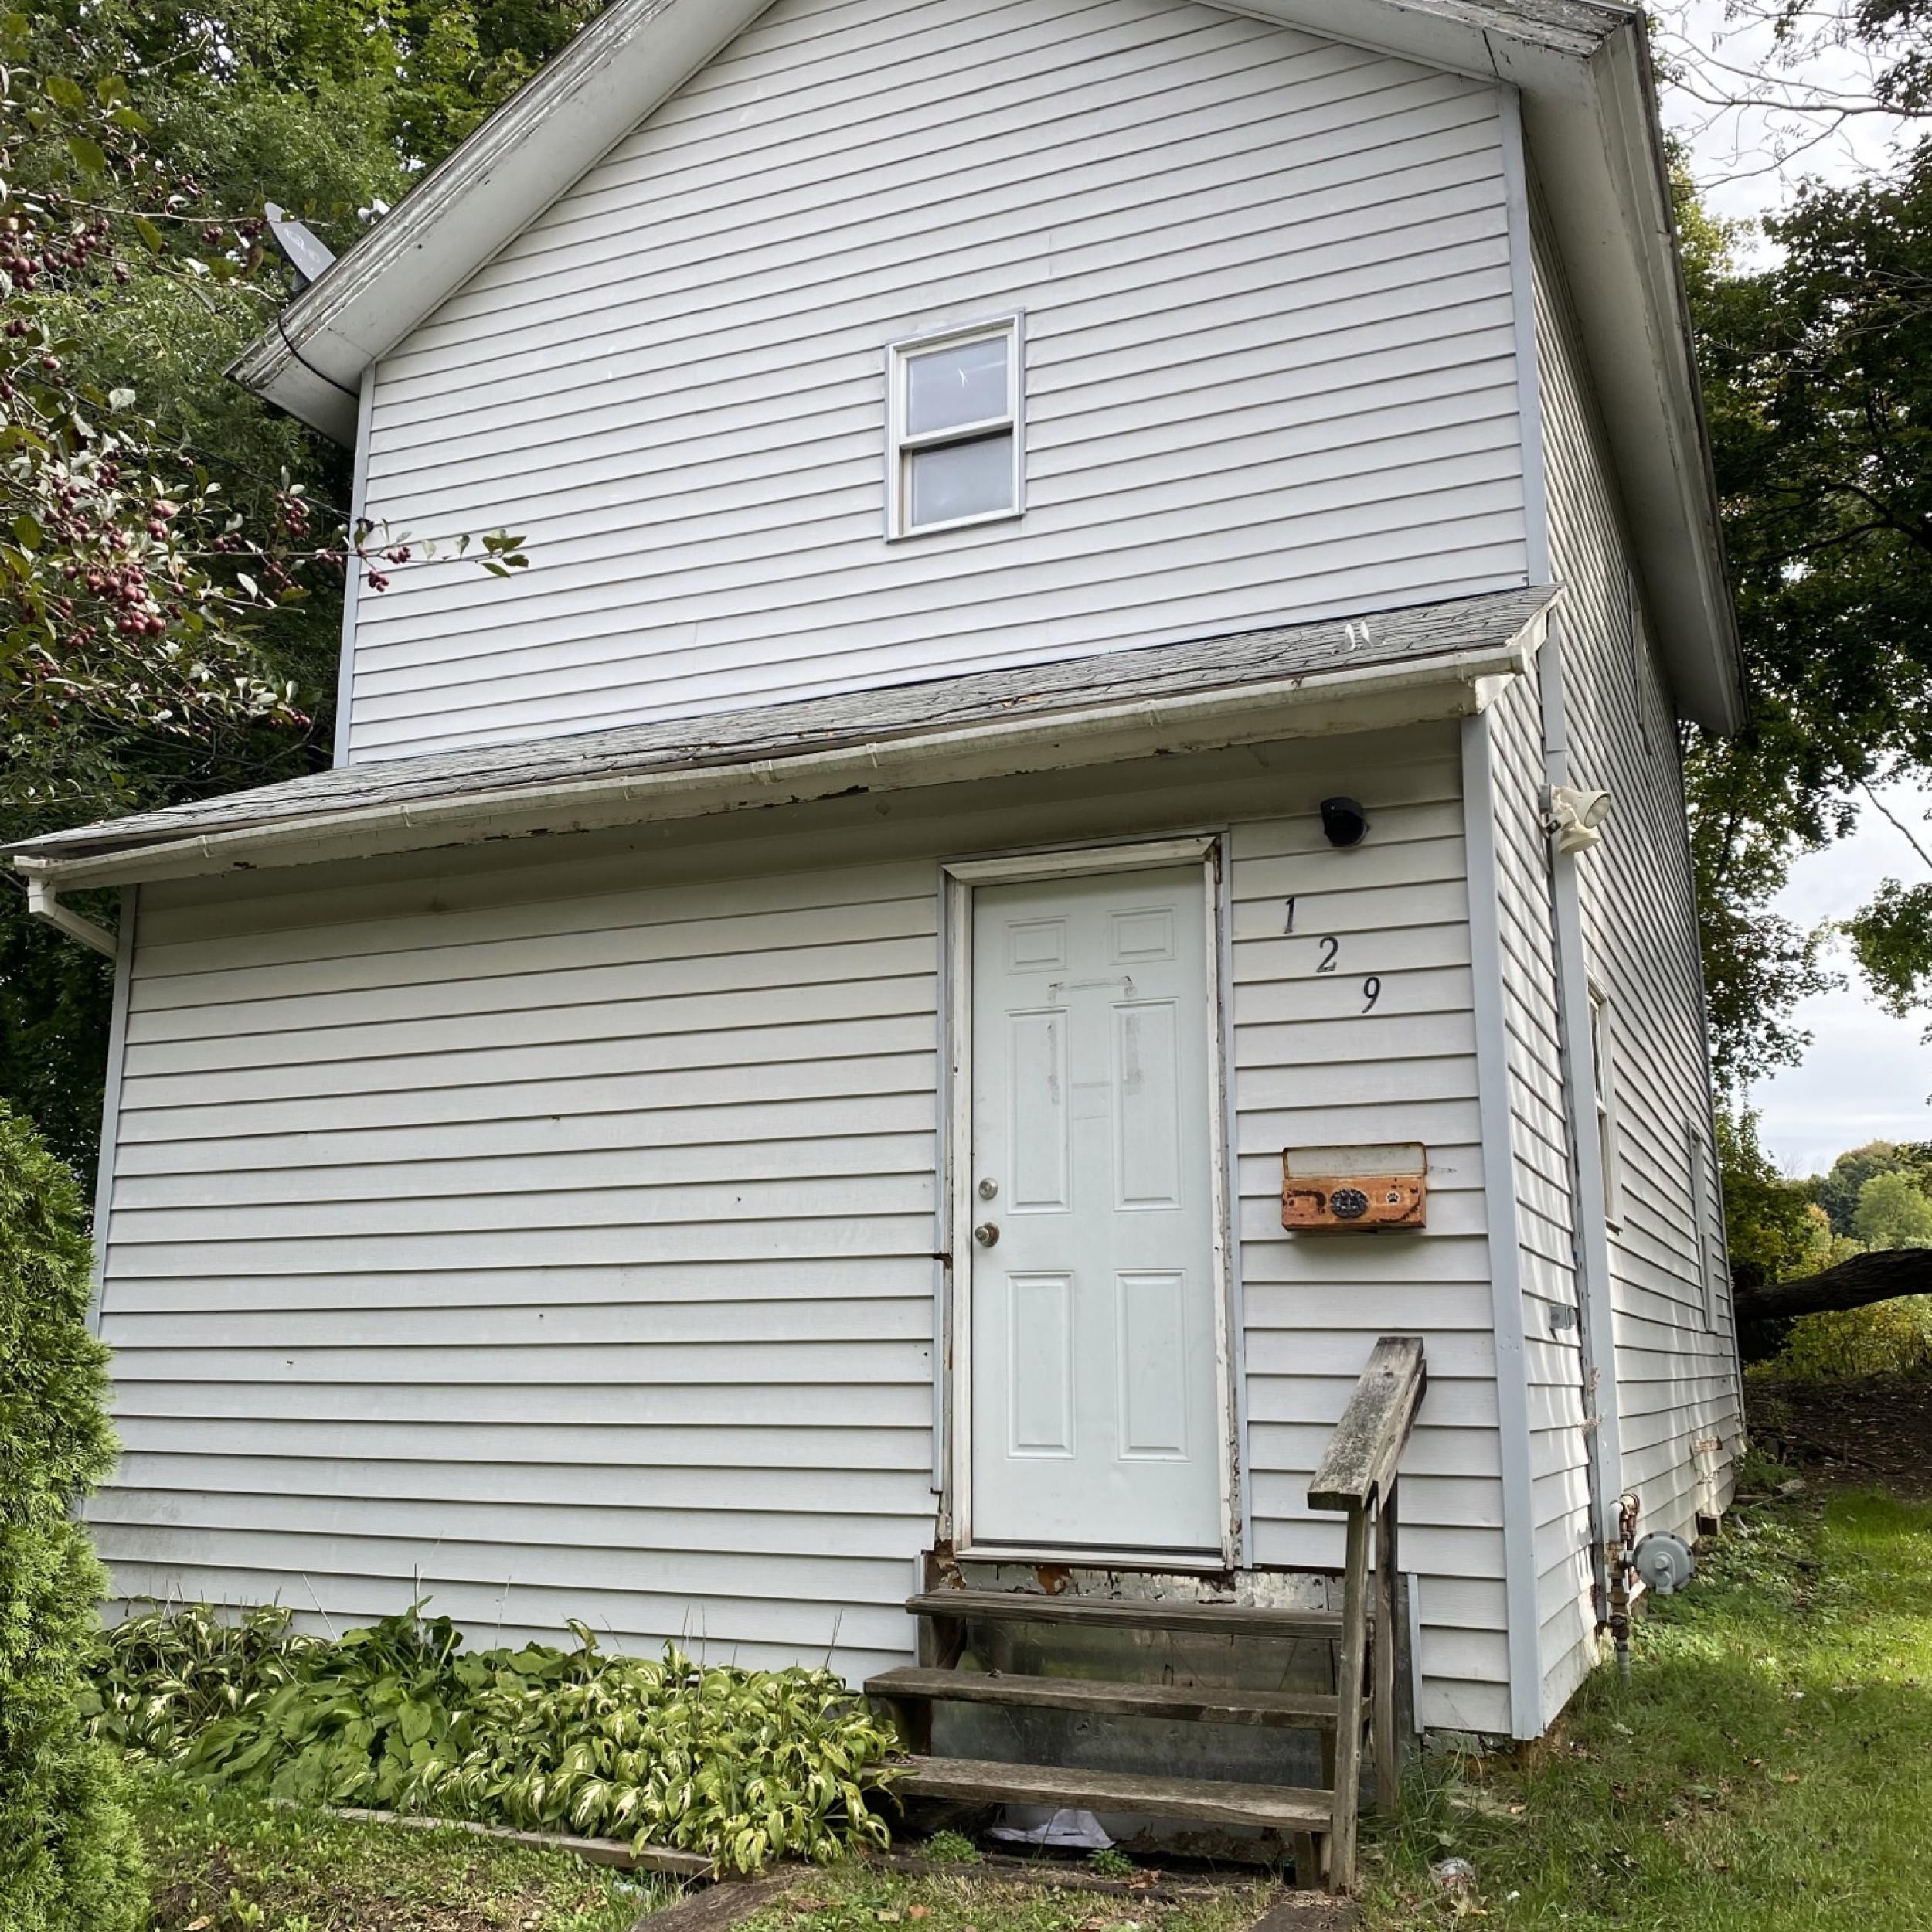 Image of a small house with gray siding